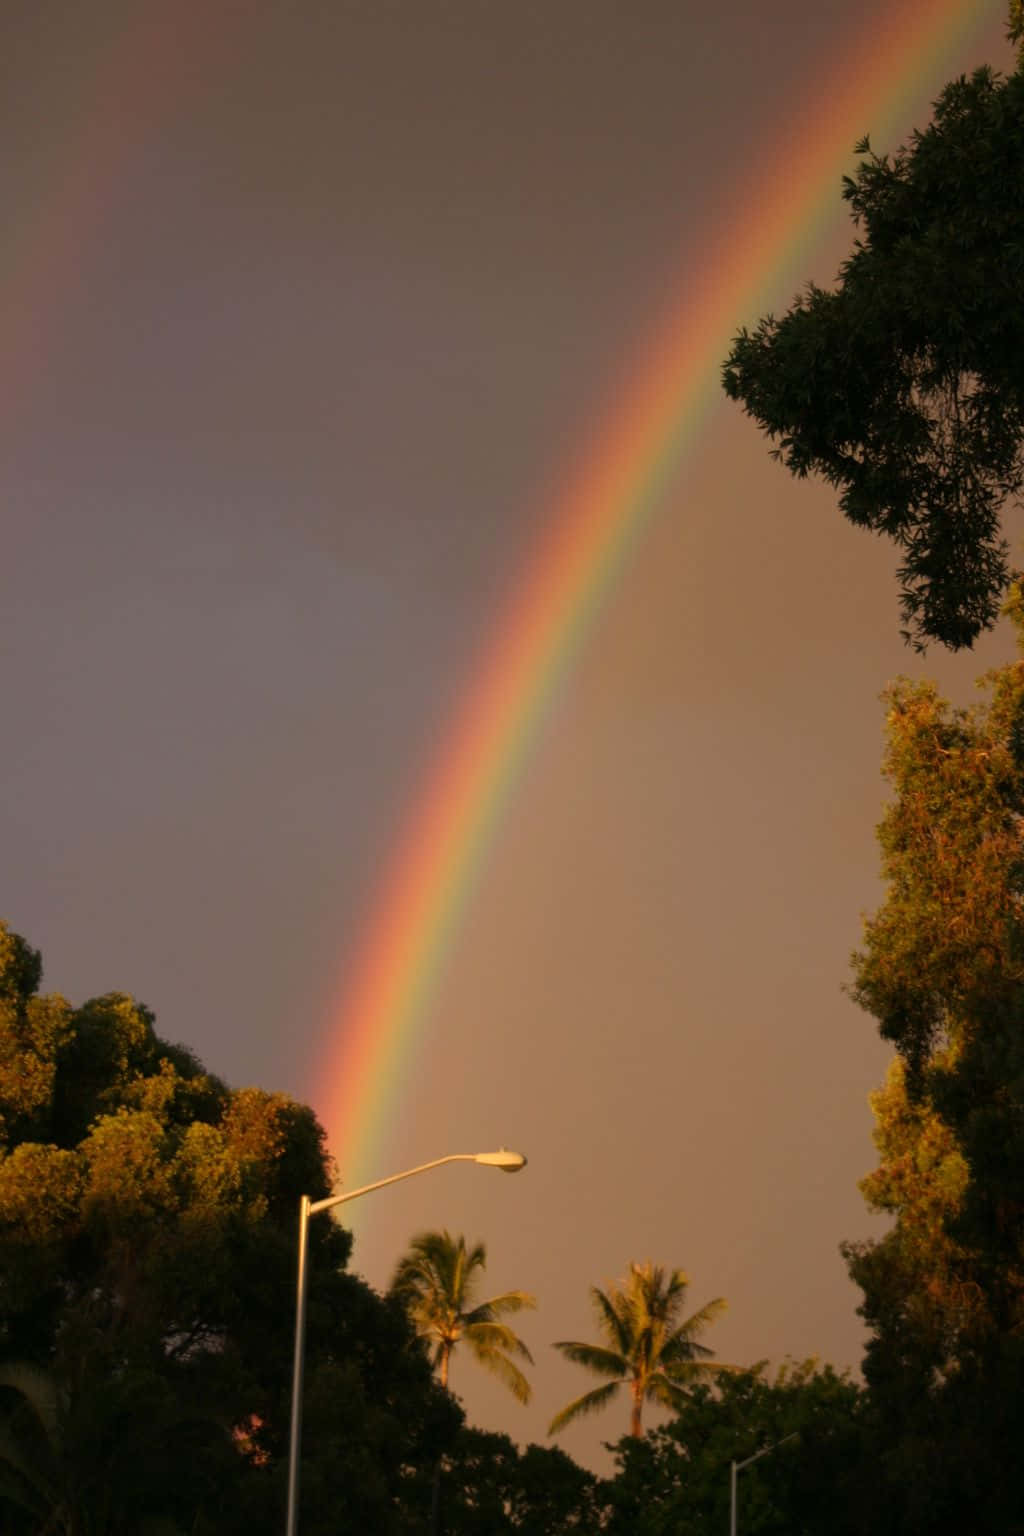 A Double Rainbow Is Seen Over A Street With Trees